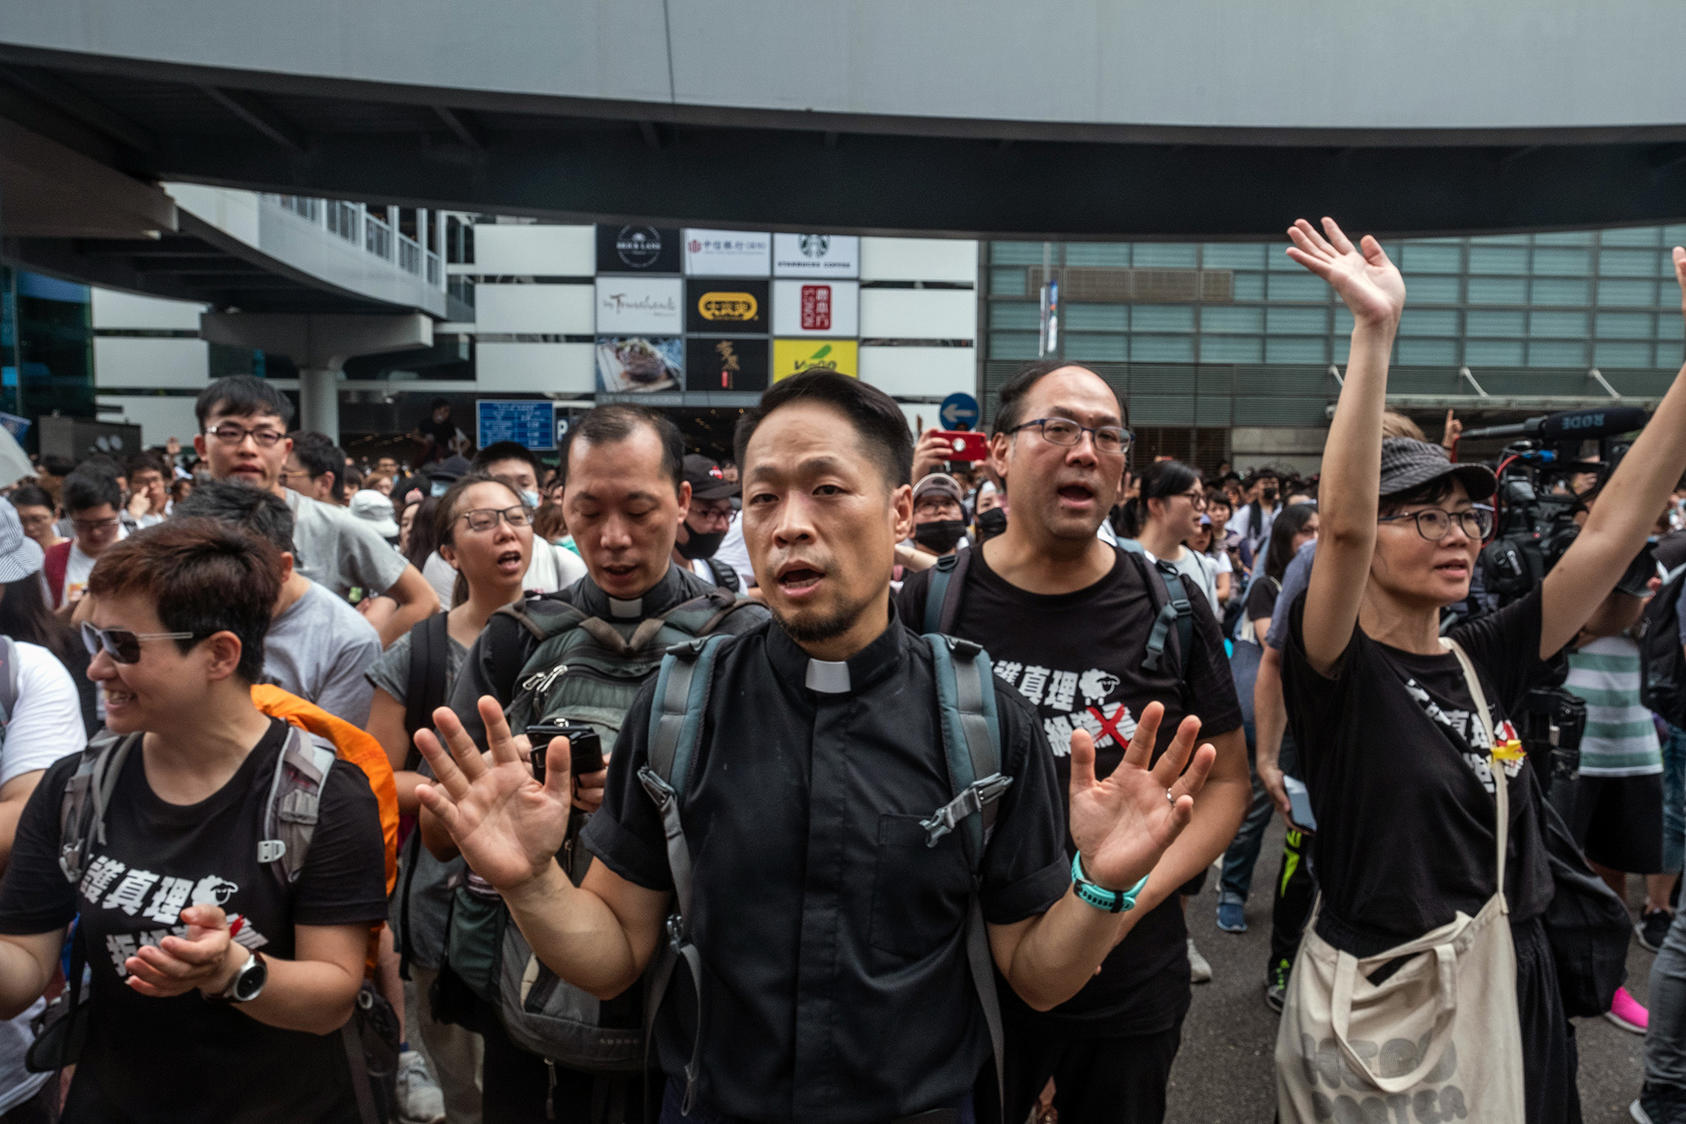 Democracy advocates in Hong Kong sing hymns outside the legislature in 2019 as they protest China’s seizure of control. Protesters adopted religious themes because religious gatherings are harder for police to break up. (Lam Yik Fei/The New York Times)